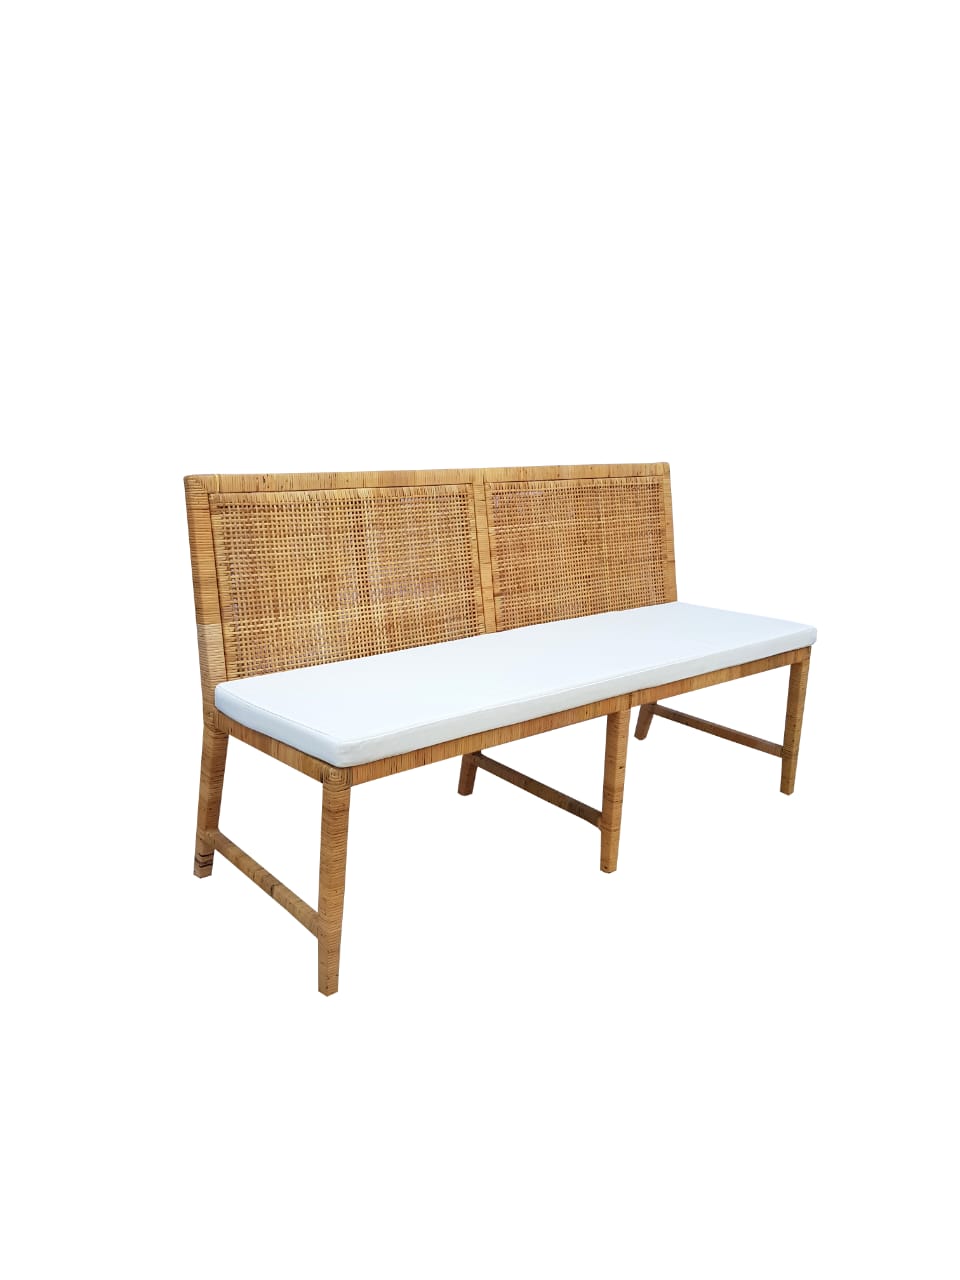 Hayes 2 Seat Bench - Pre-Sale